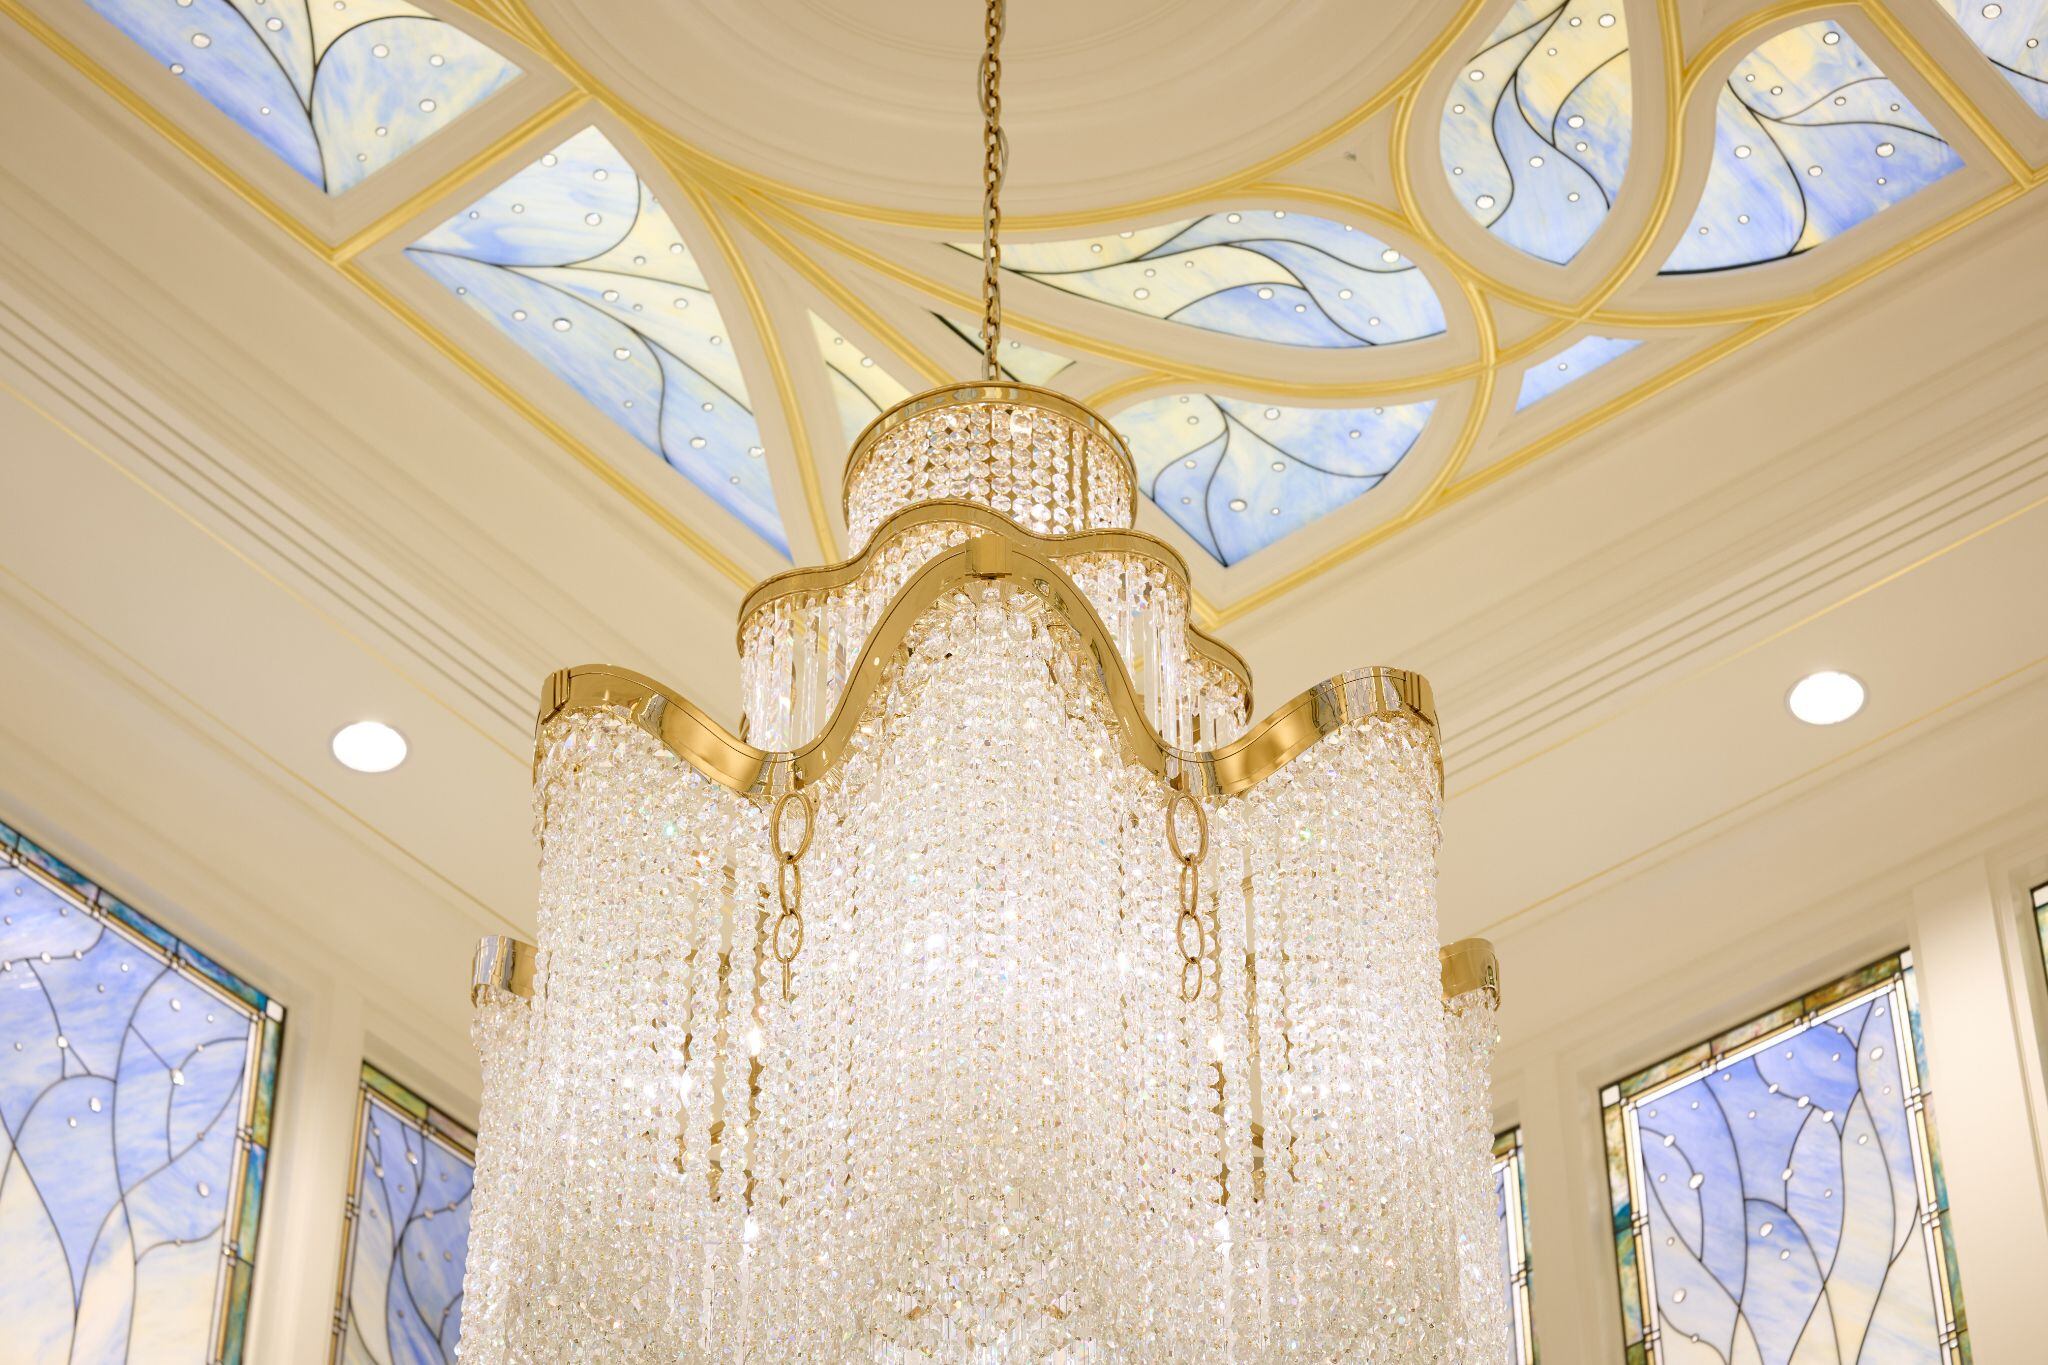 (The Church of Jesus Christ of Latter-day Saints) A chandelier in the Celestial Room of the Layton Utah Temple.